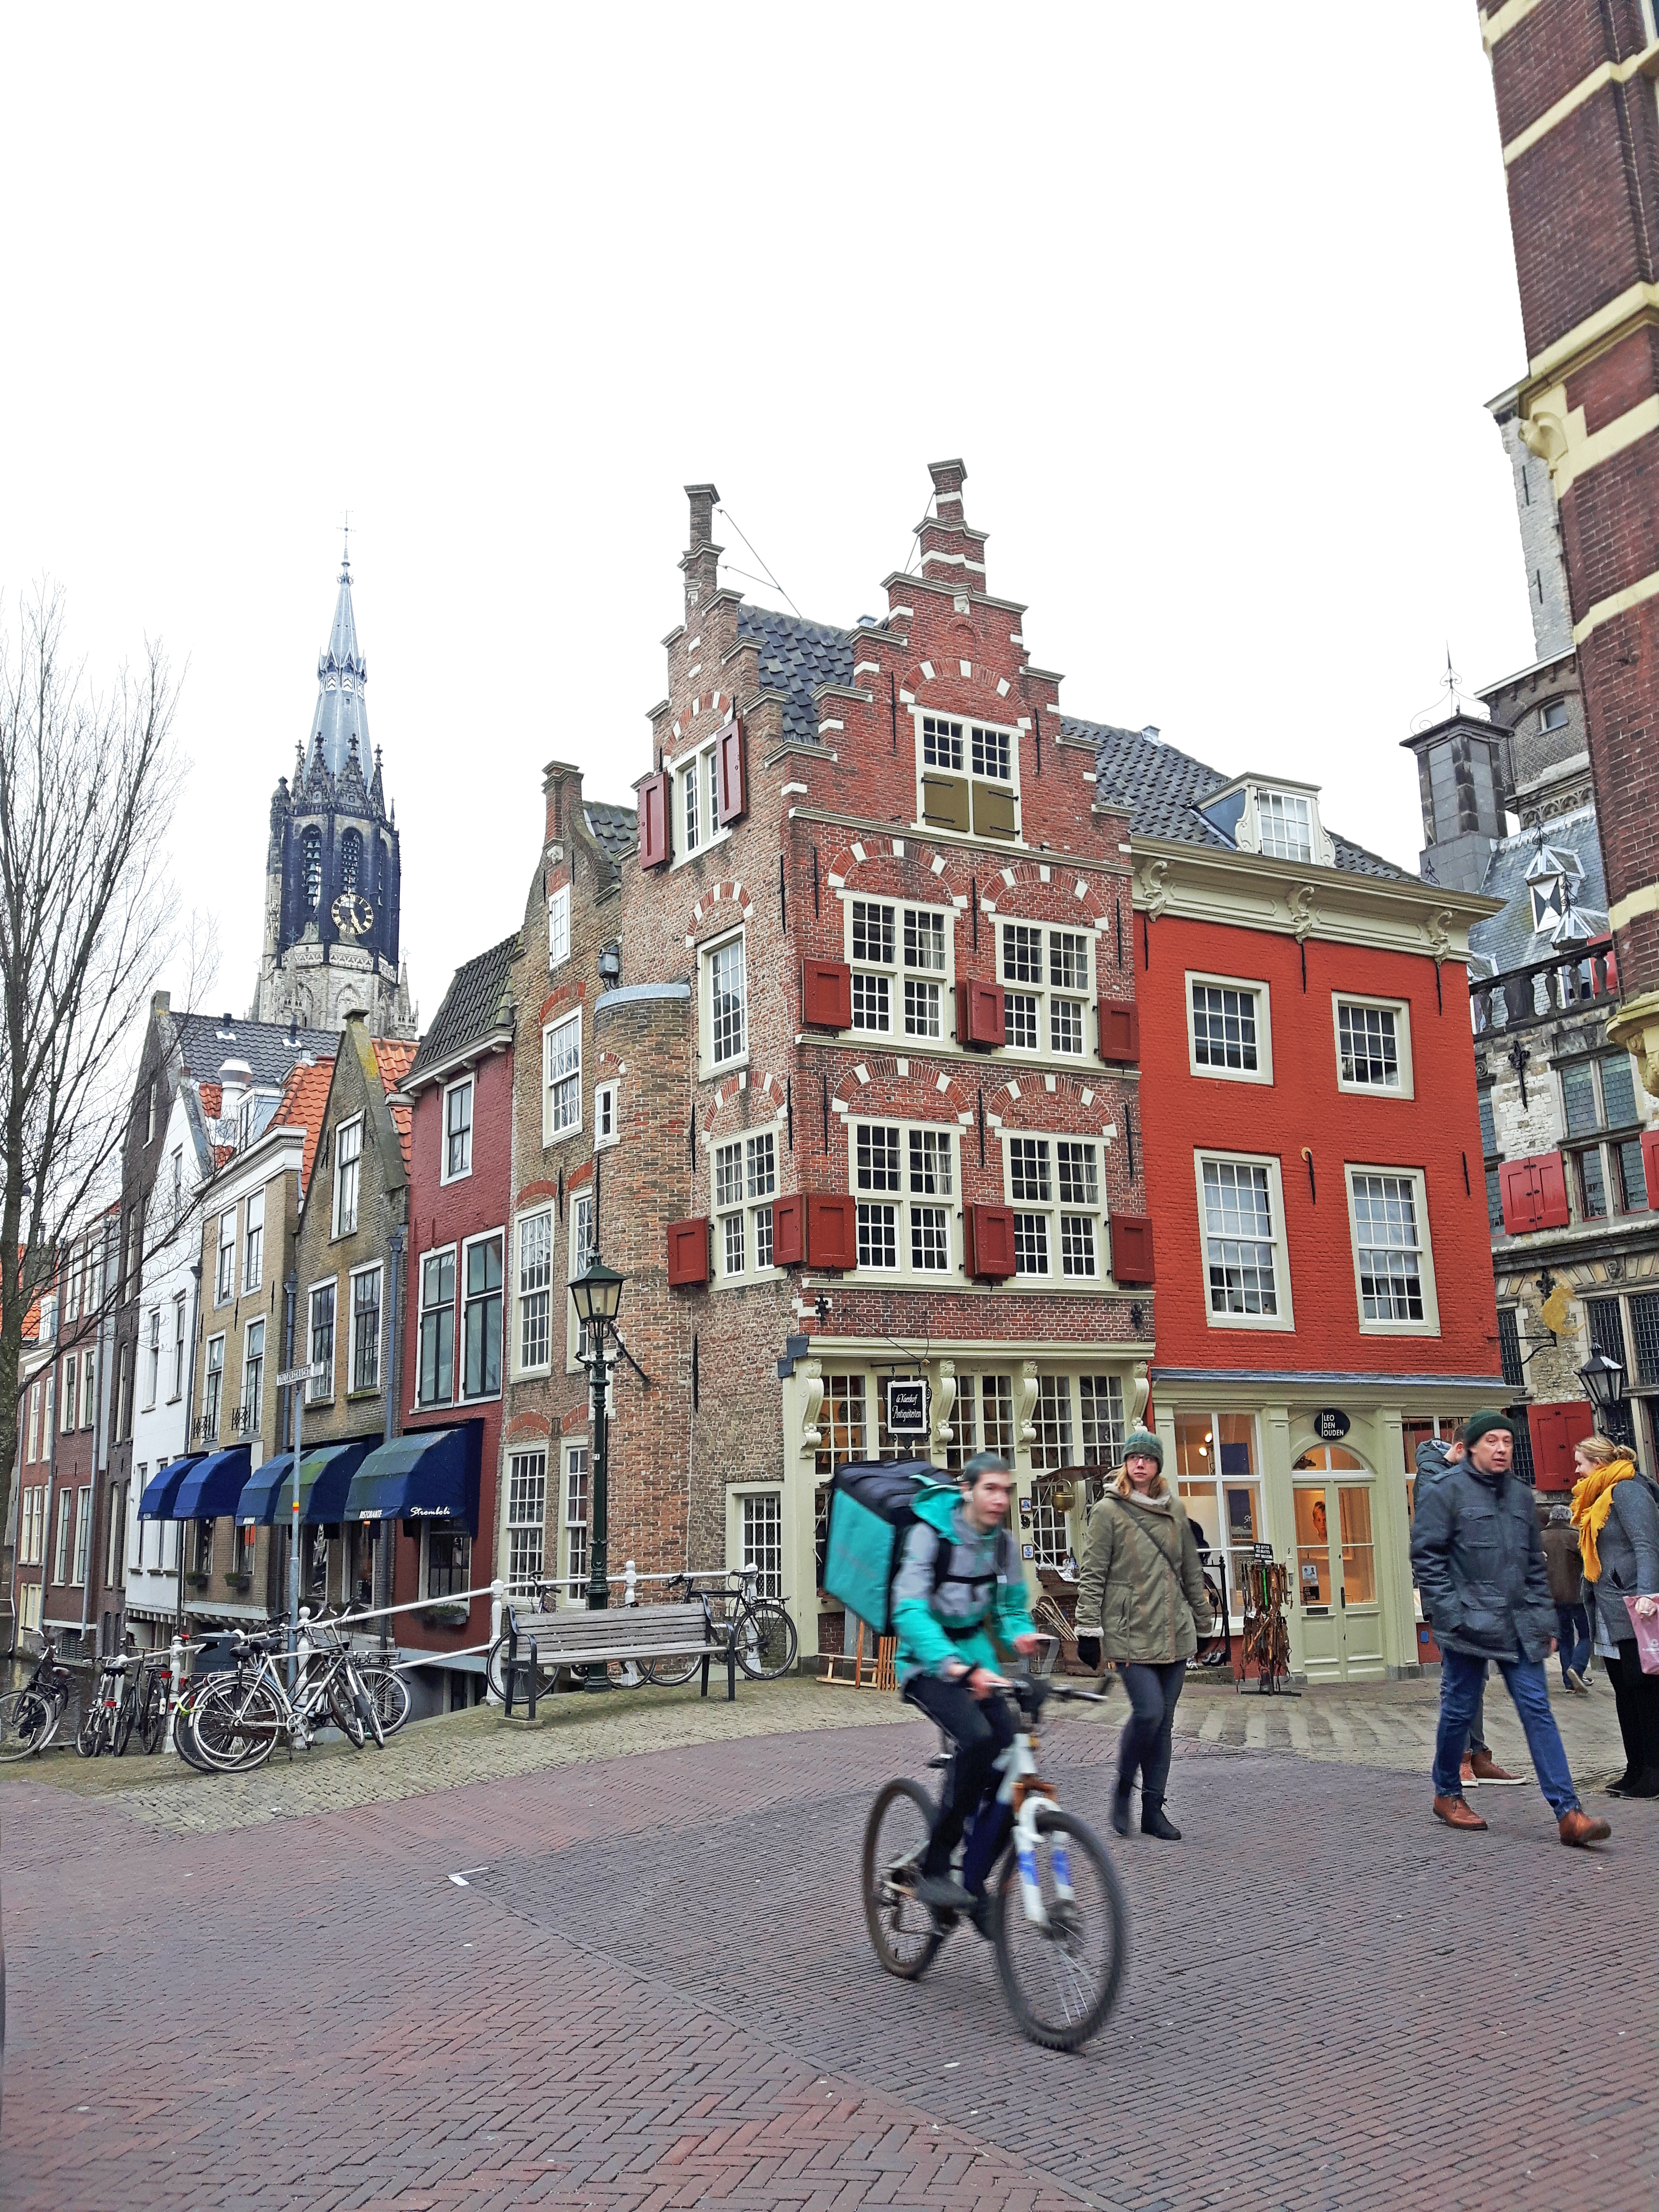 25_Photos_That_Will_Inspire_You_To_Book_A_Trip_To_The_Netherlands